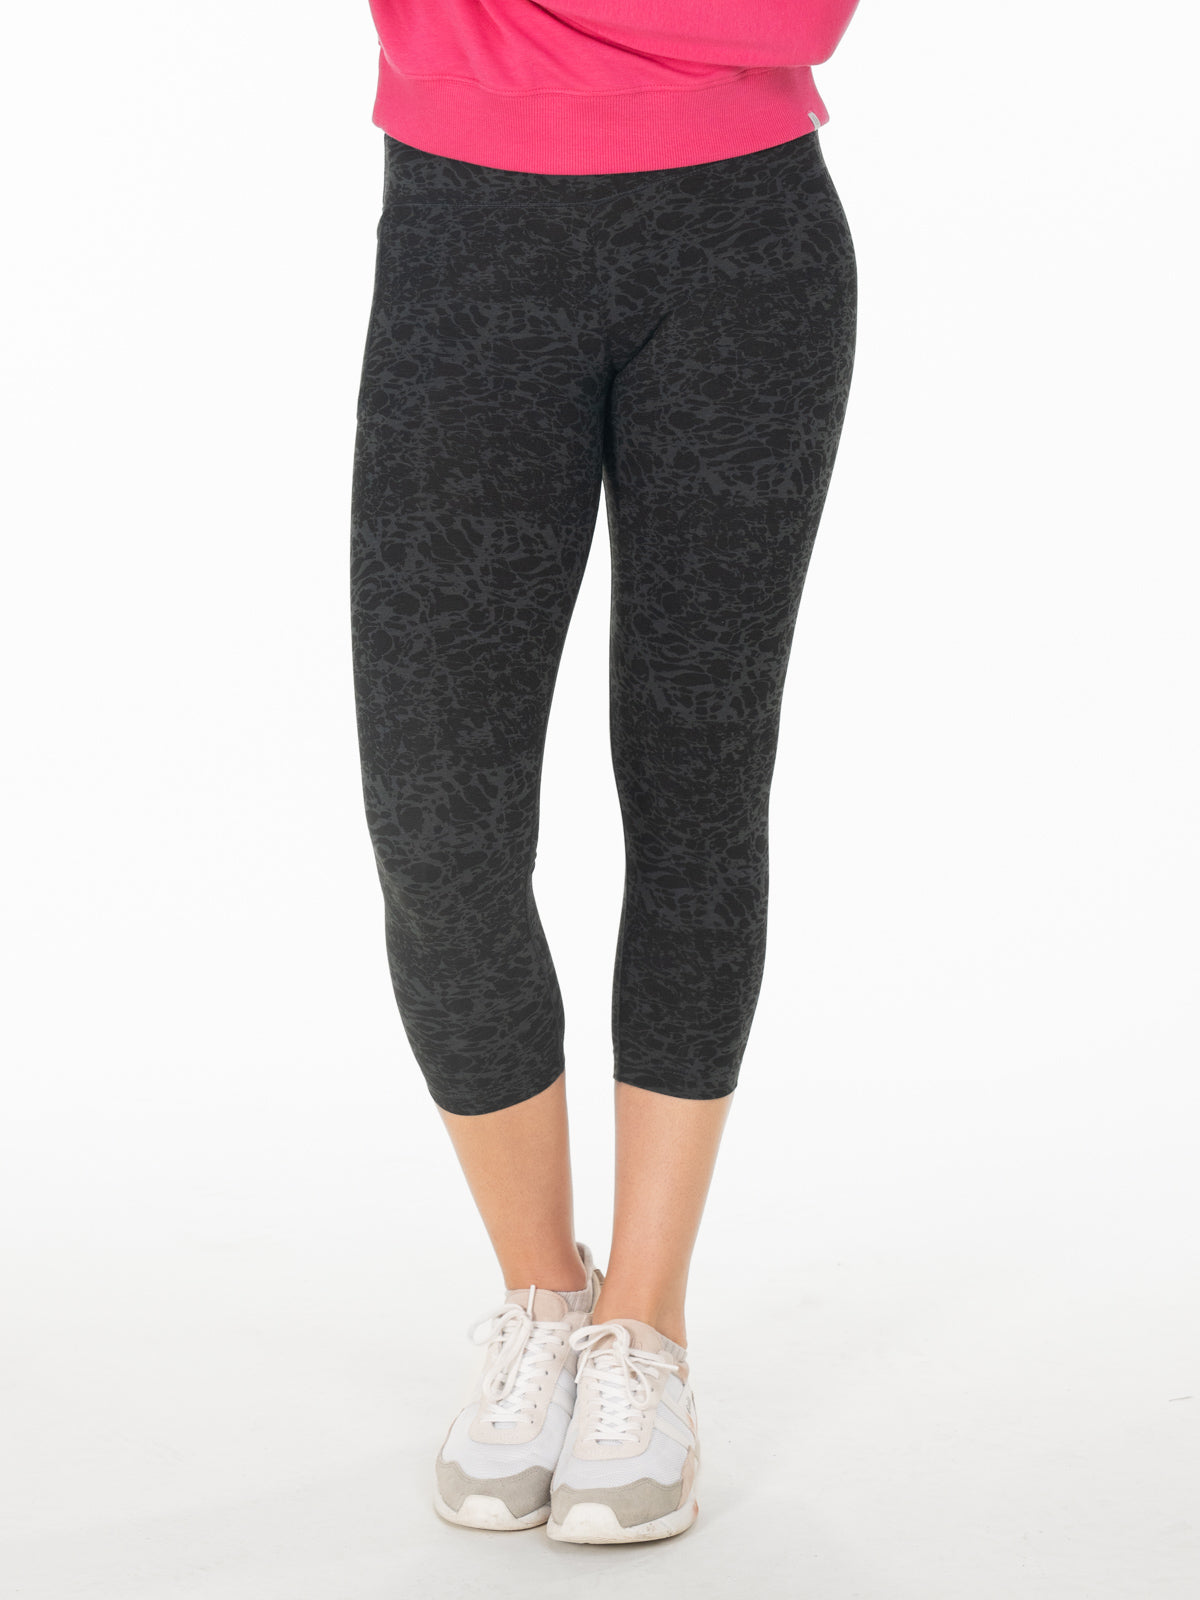 Crop Leggings With Pockets Canada Goose Neck  International Society of  Precision Agriculture